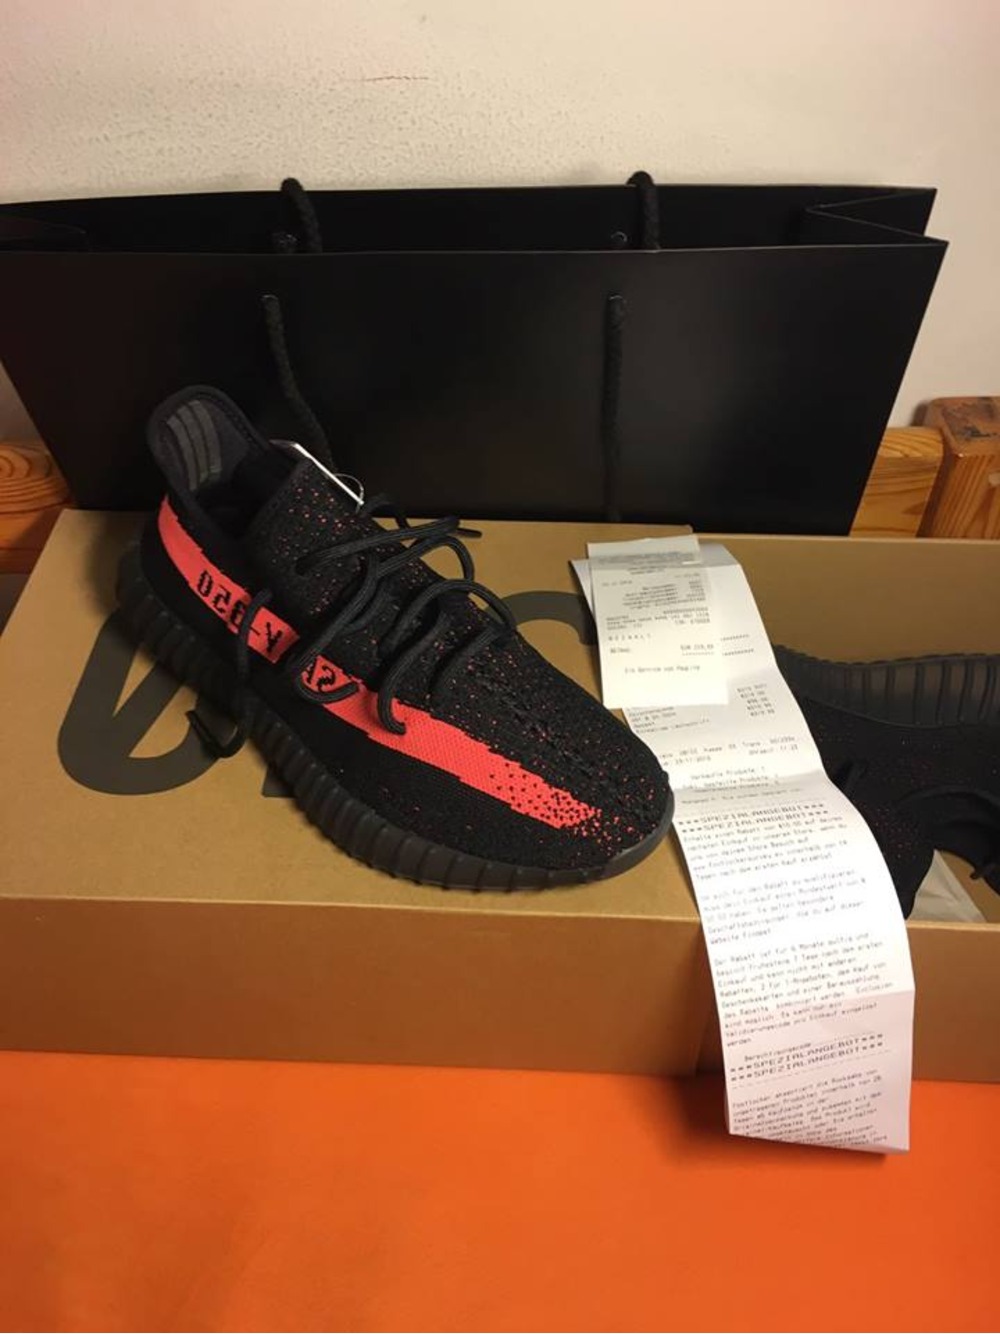 Brand New adidas yeezy boost 350 v2 Bred Black And Red DS Size